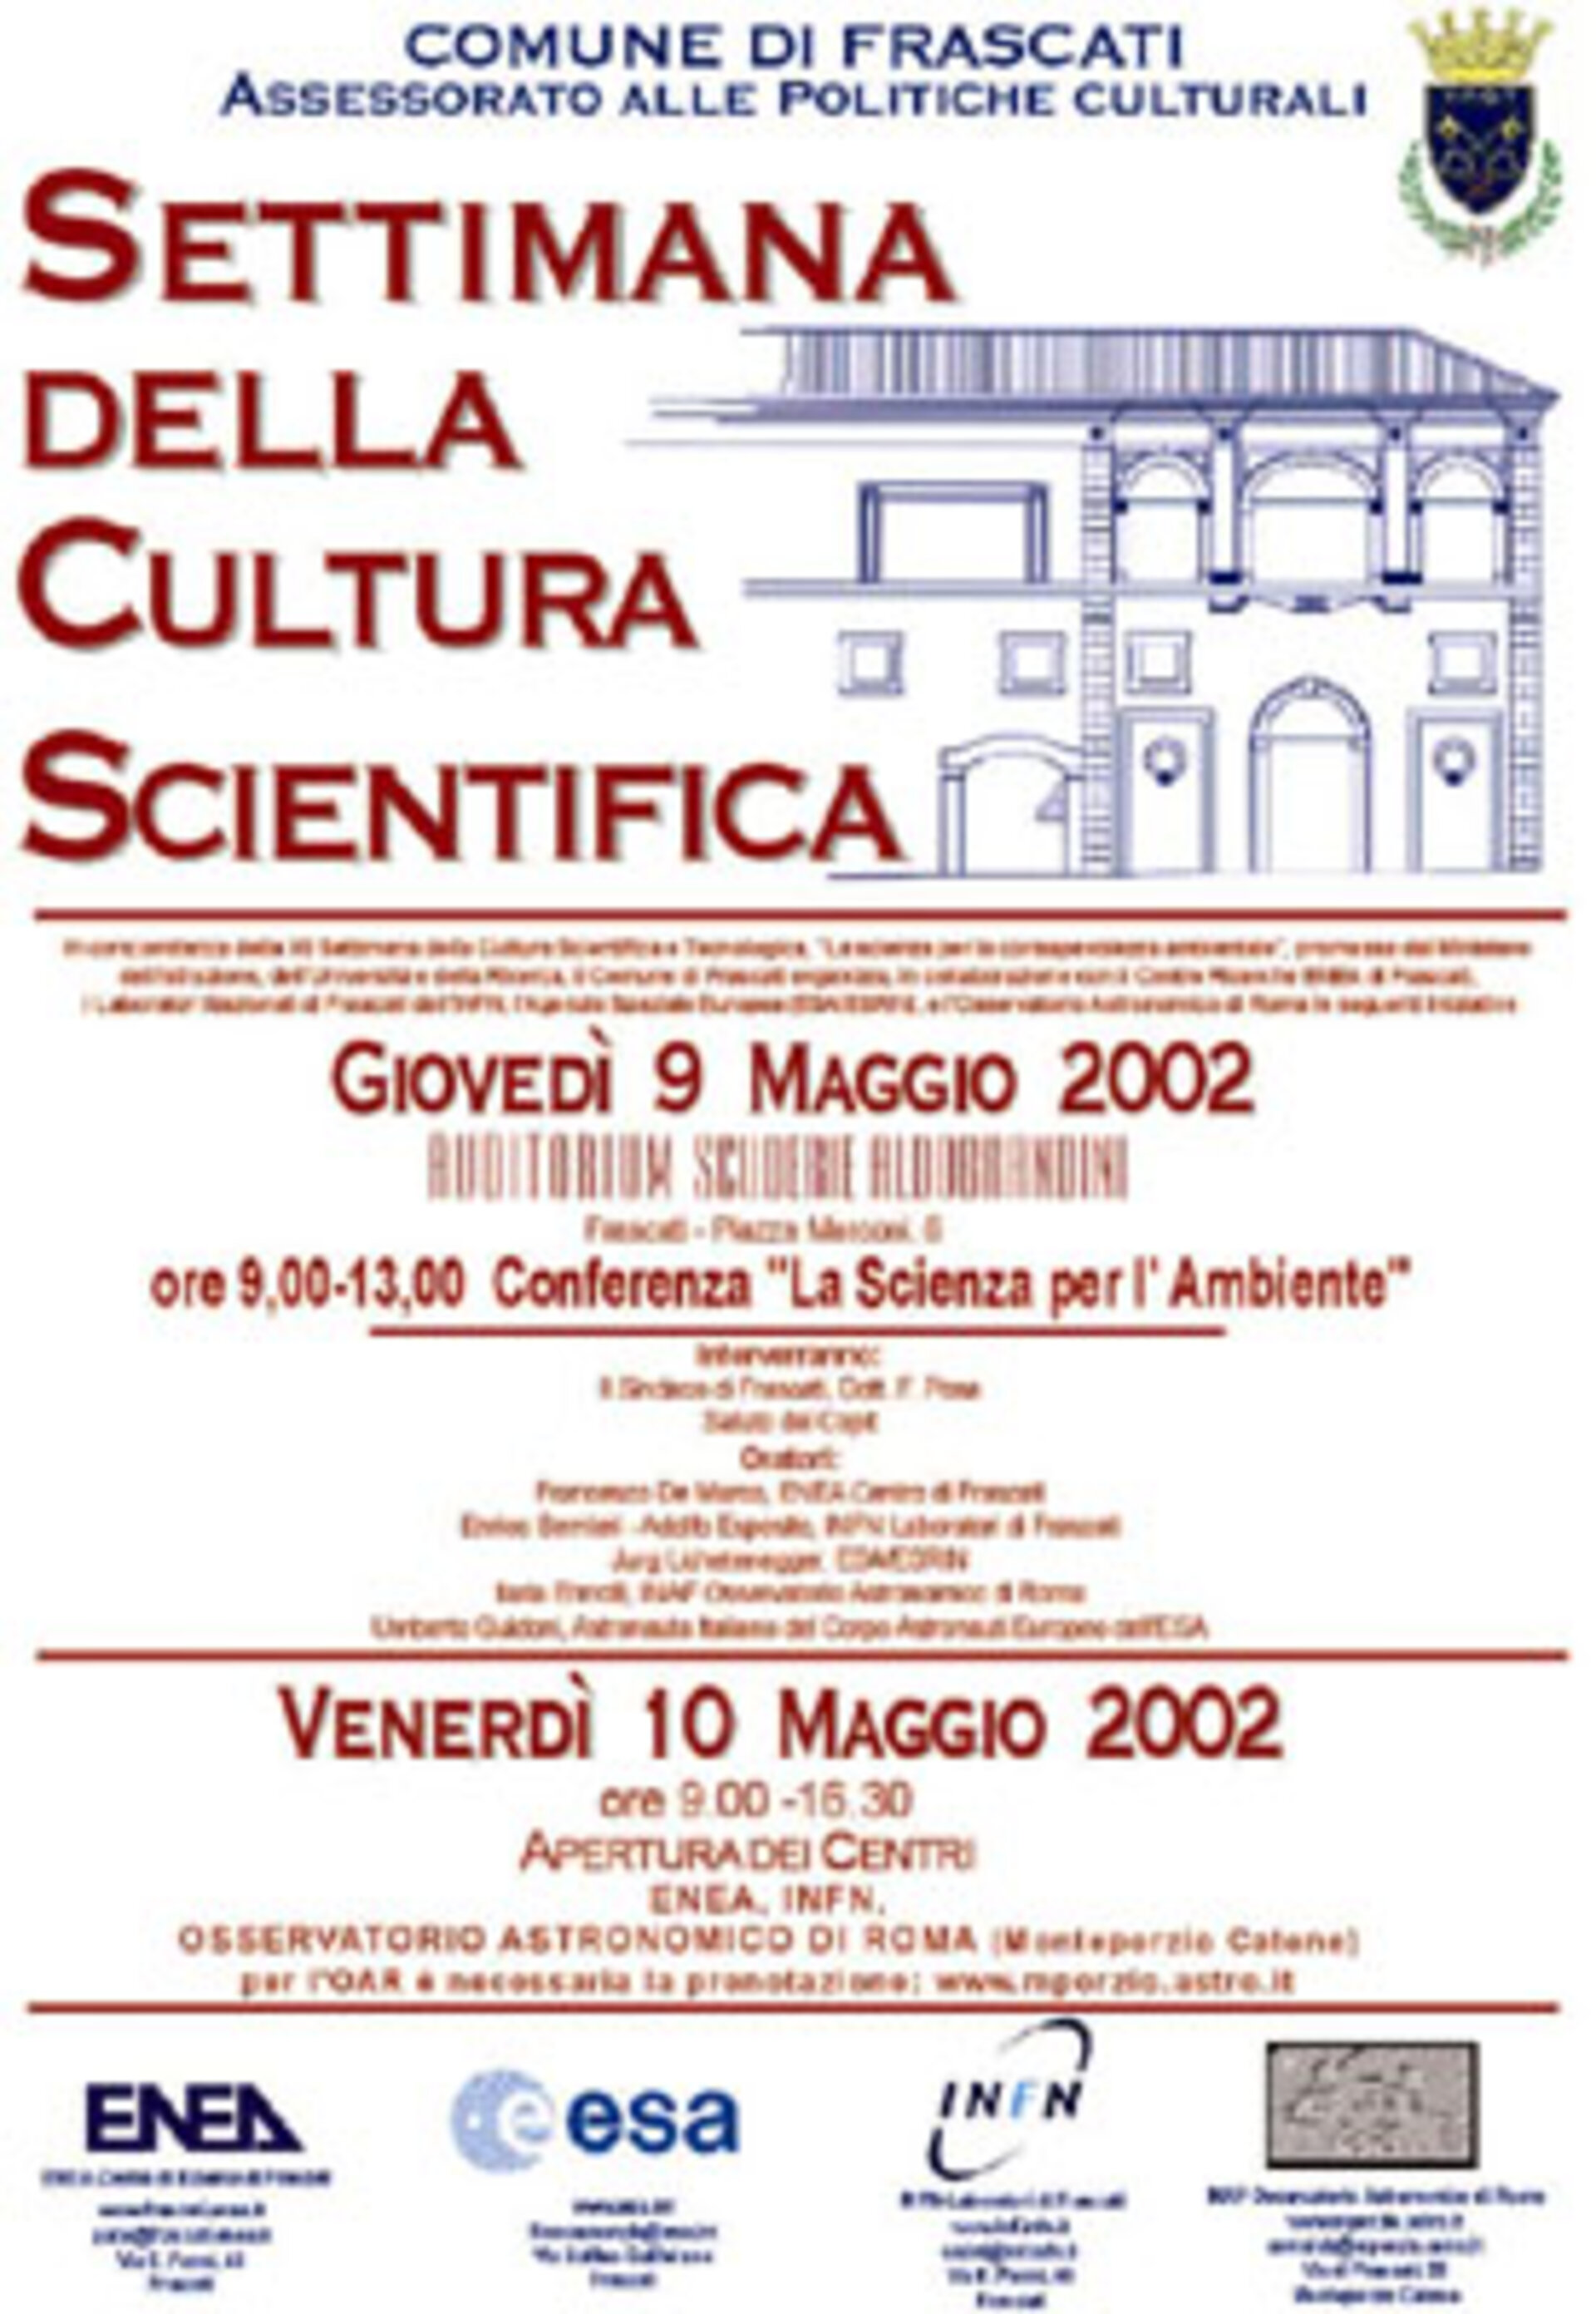 Poster of the events related to the "Settimana della Scienza" organised from the Italian Minister of Education.